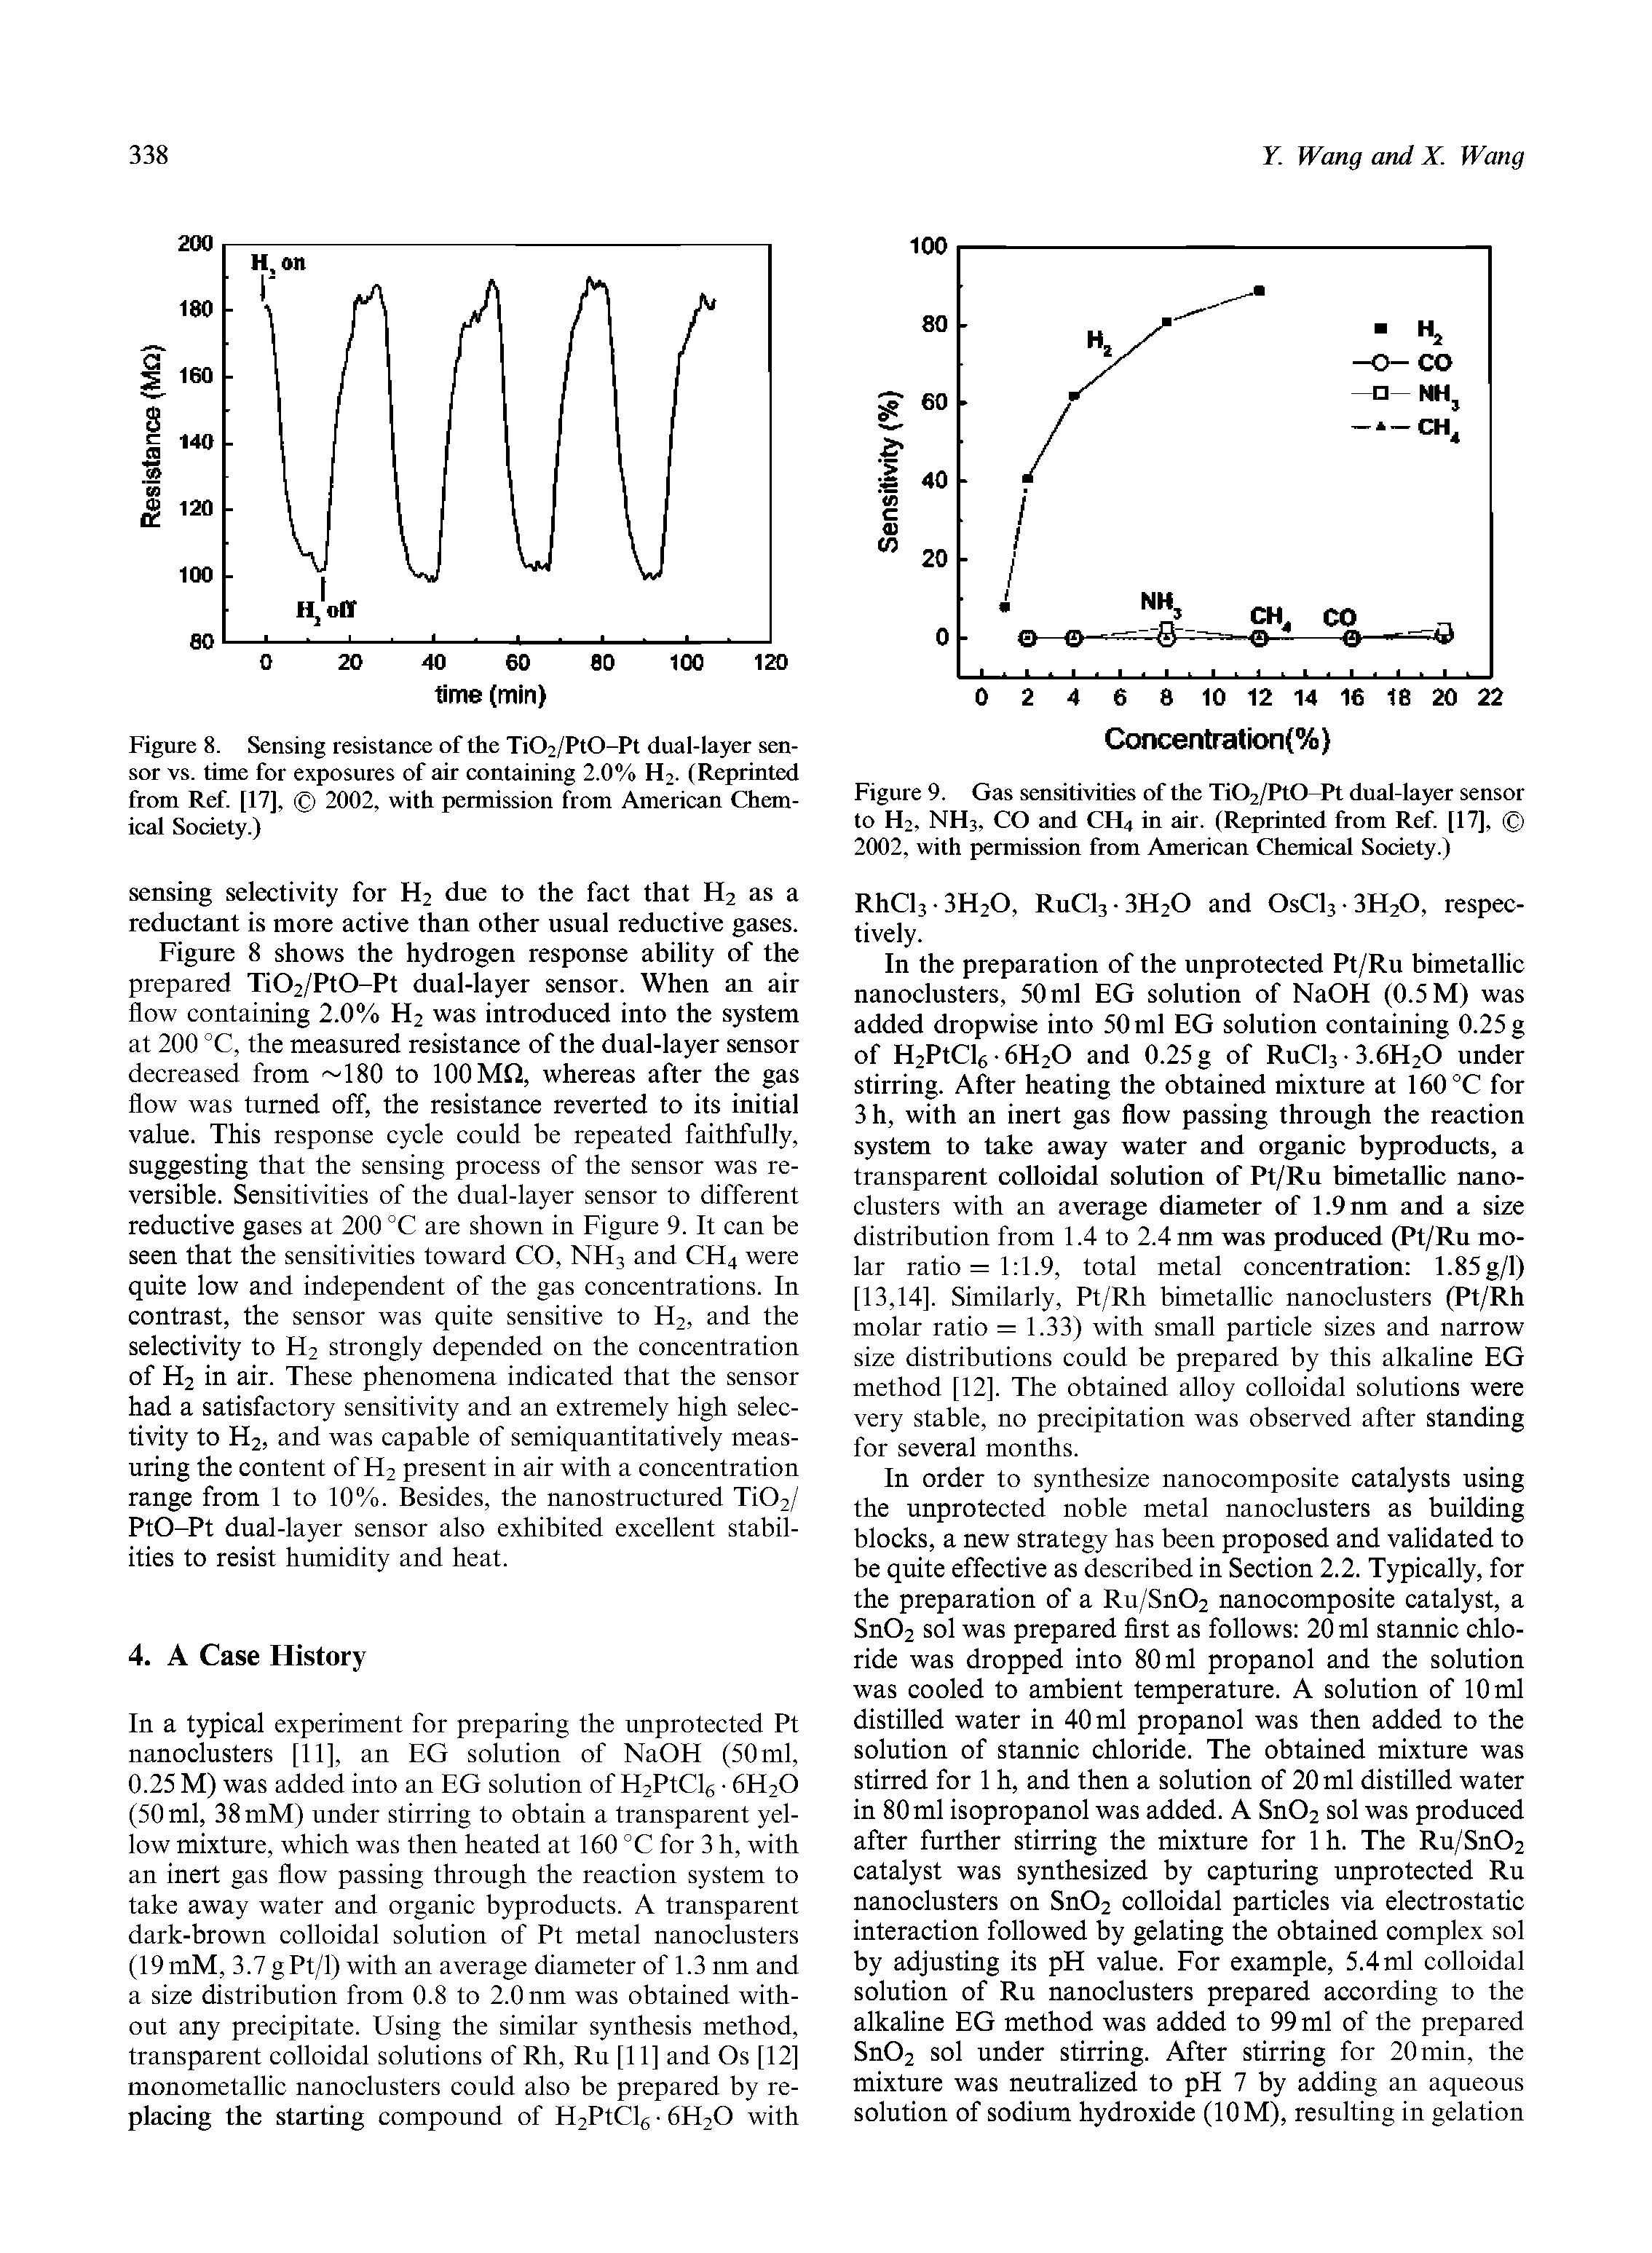 Figure 8. Sensing resistance of the Ti02/Pt0-Pt dual-layer sensor vs. time for exposures of air containing 2.0% H2. (Reprinted from Ref [17], 2002, with permission from American Chemical Society.)...